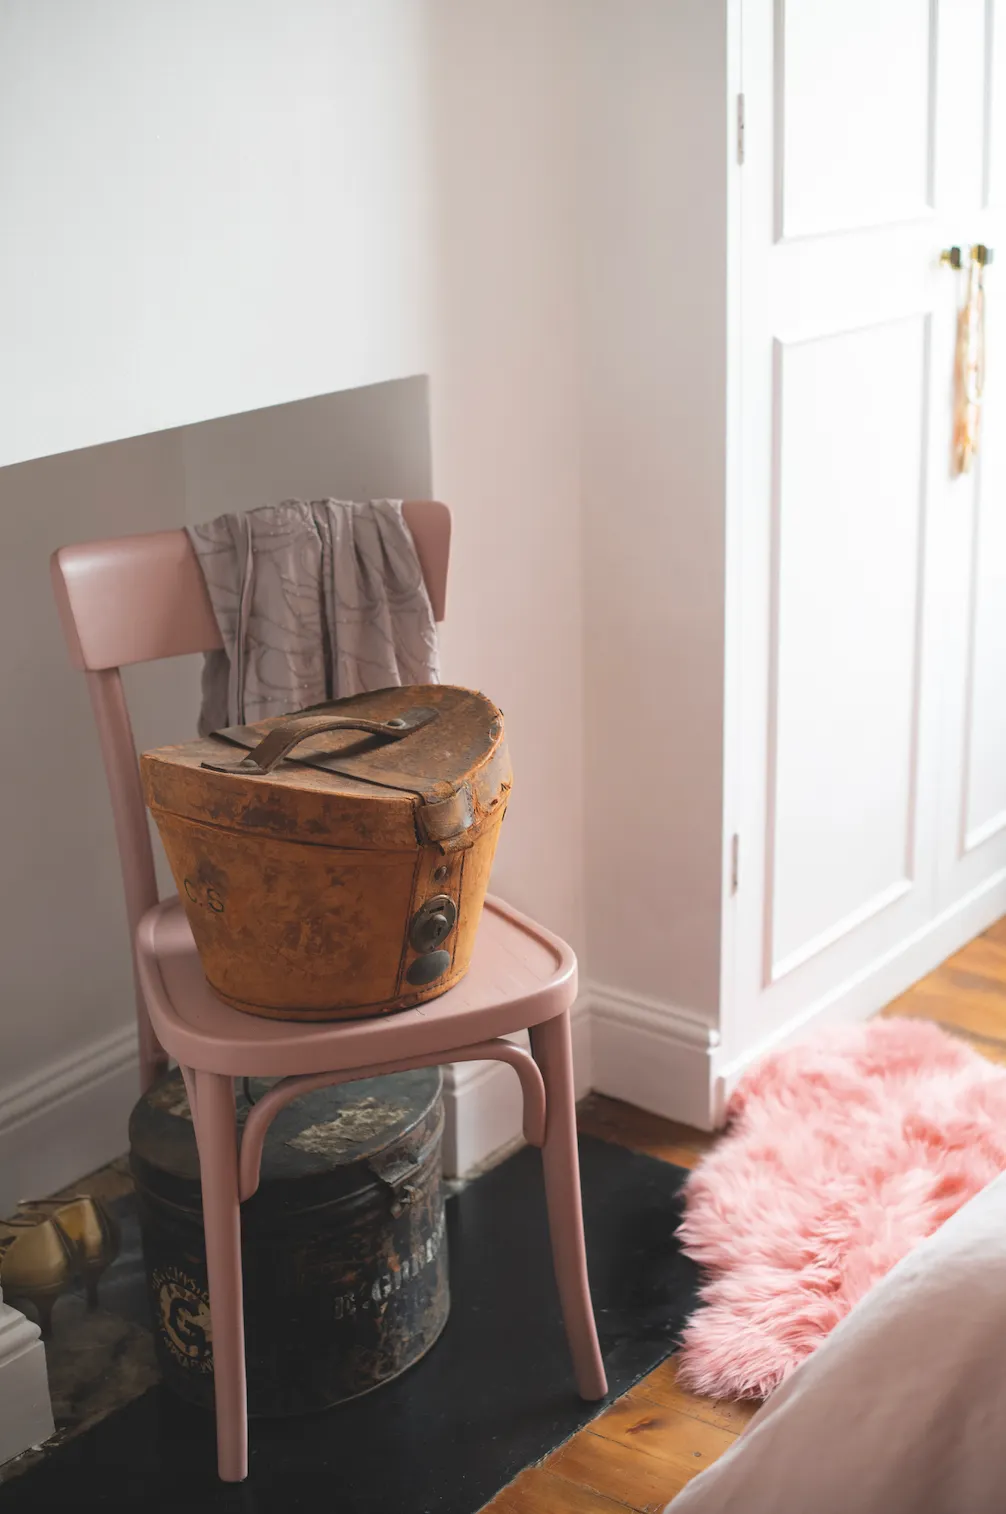 Real home - A second-hand chair painted in pink